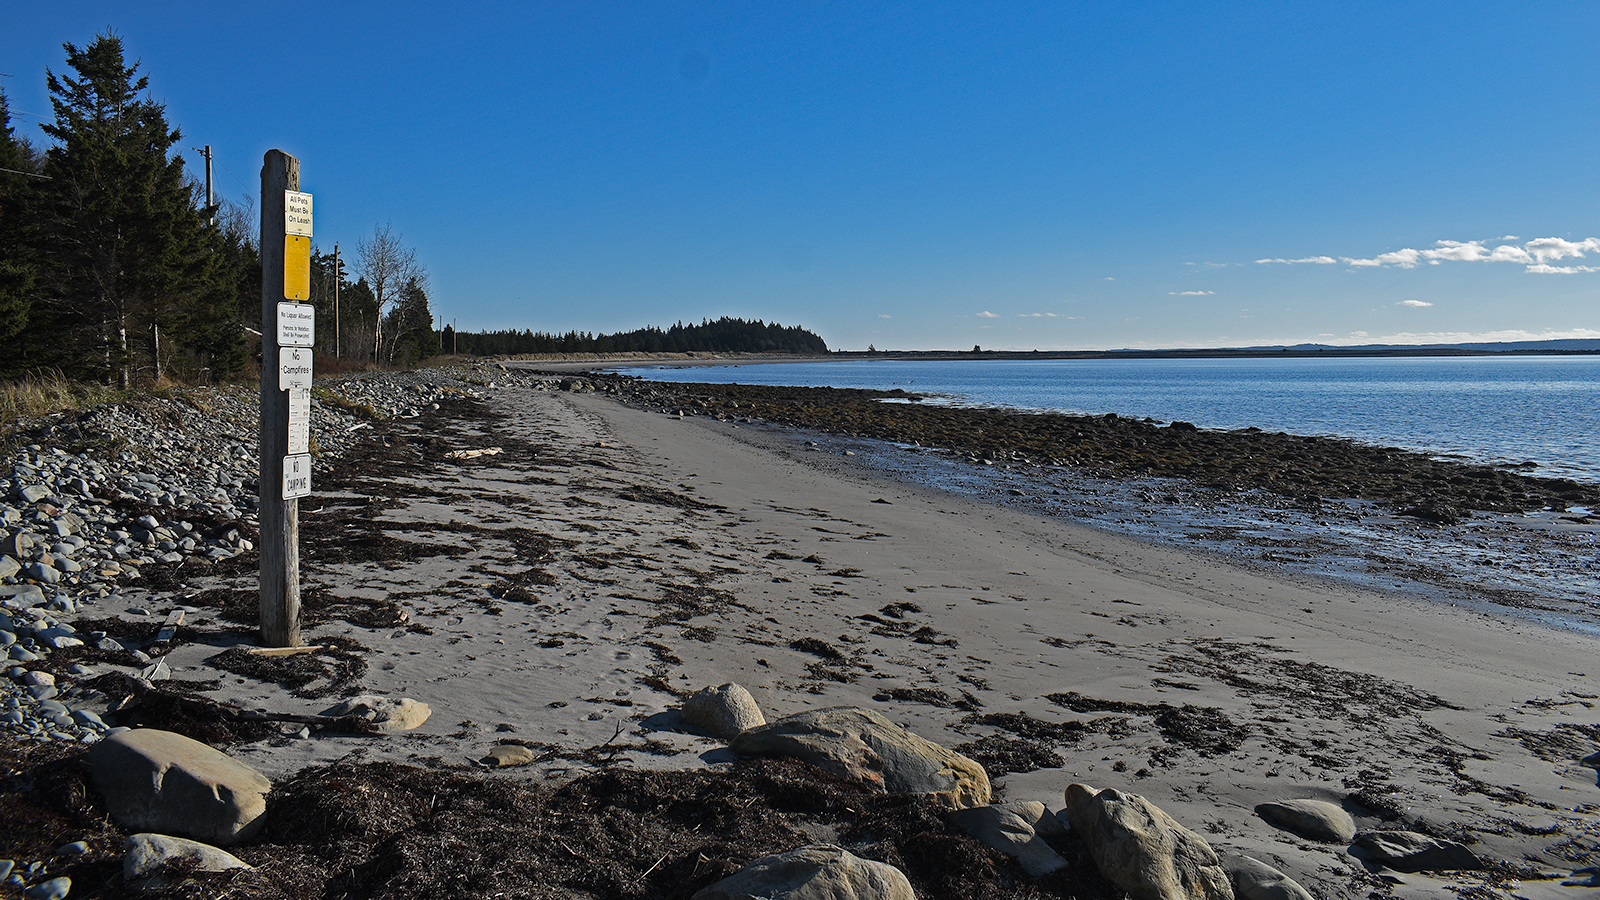 A beach on McNabs Island nearby Garrison Pier. On it are signs on a wooden post that read "no camping" and "no campfires".